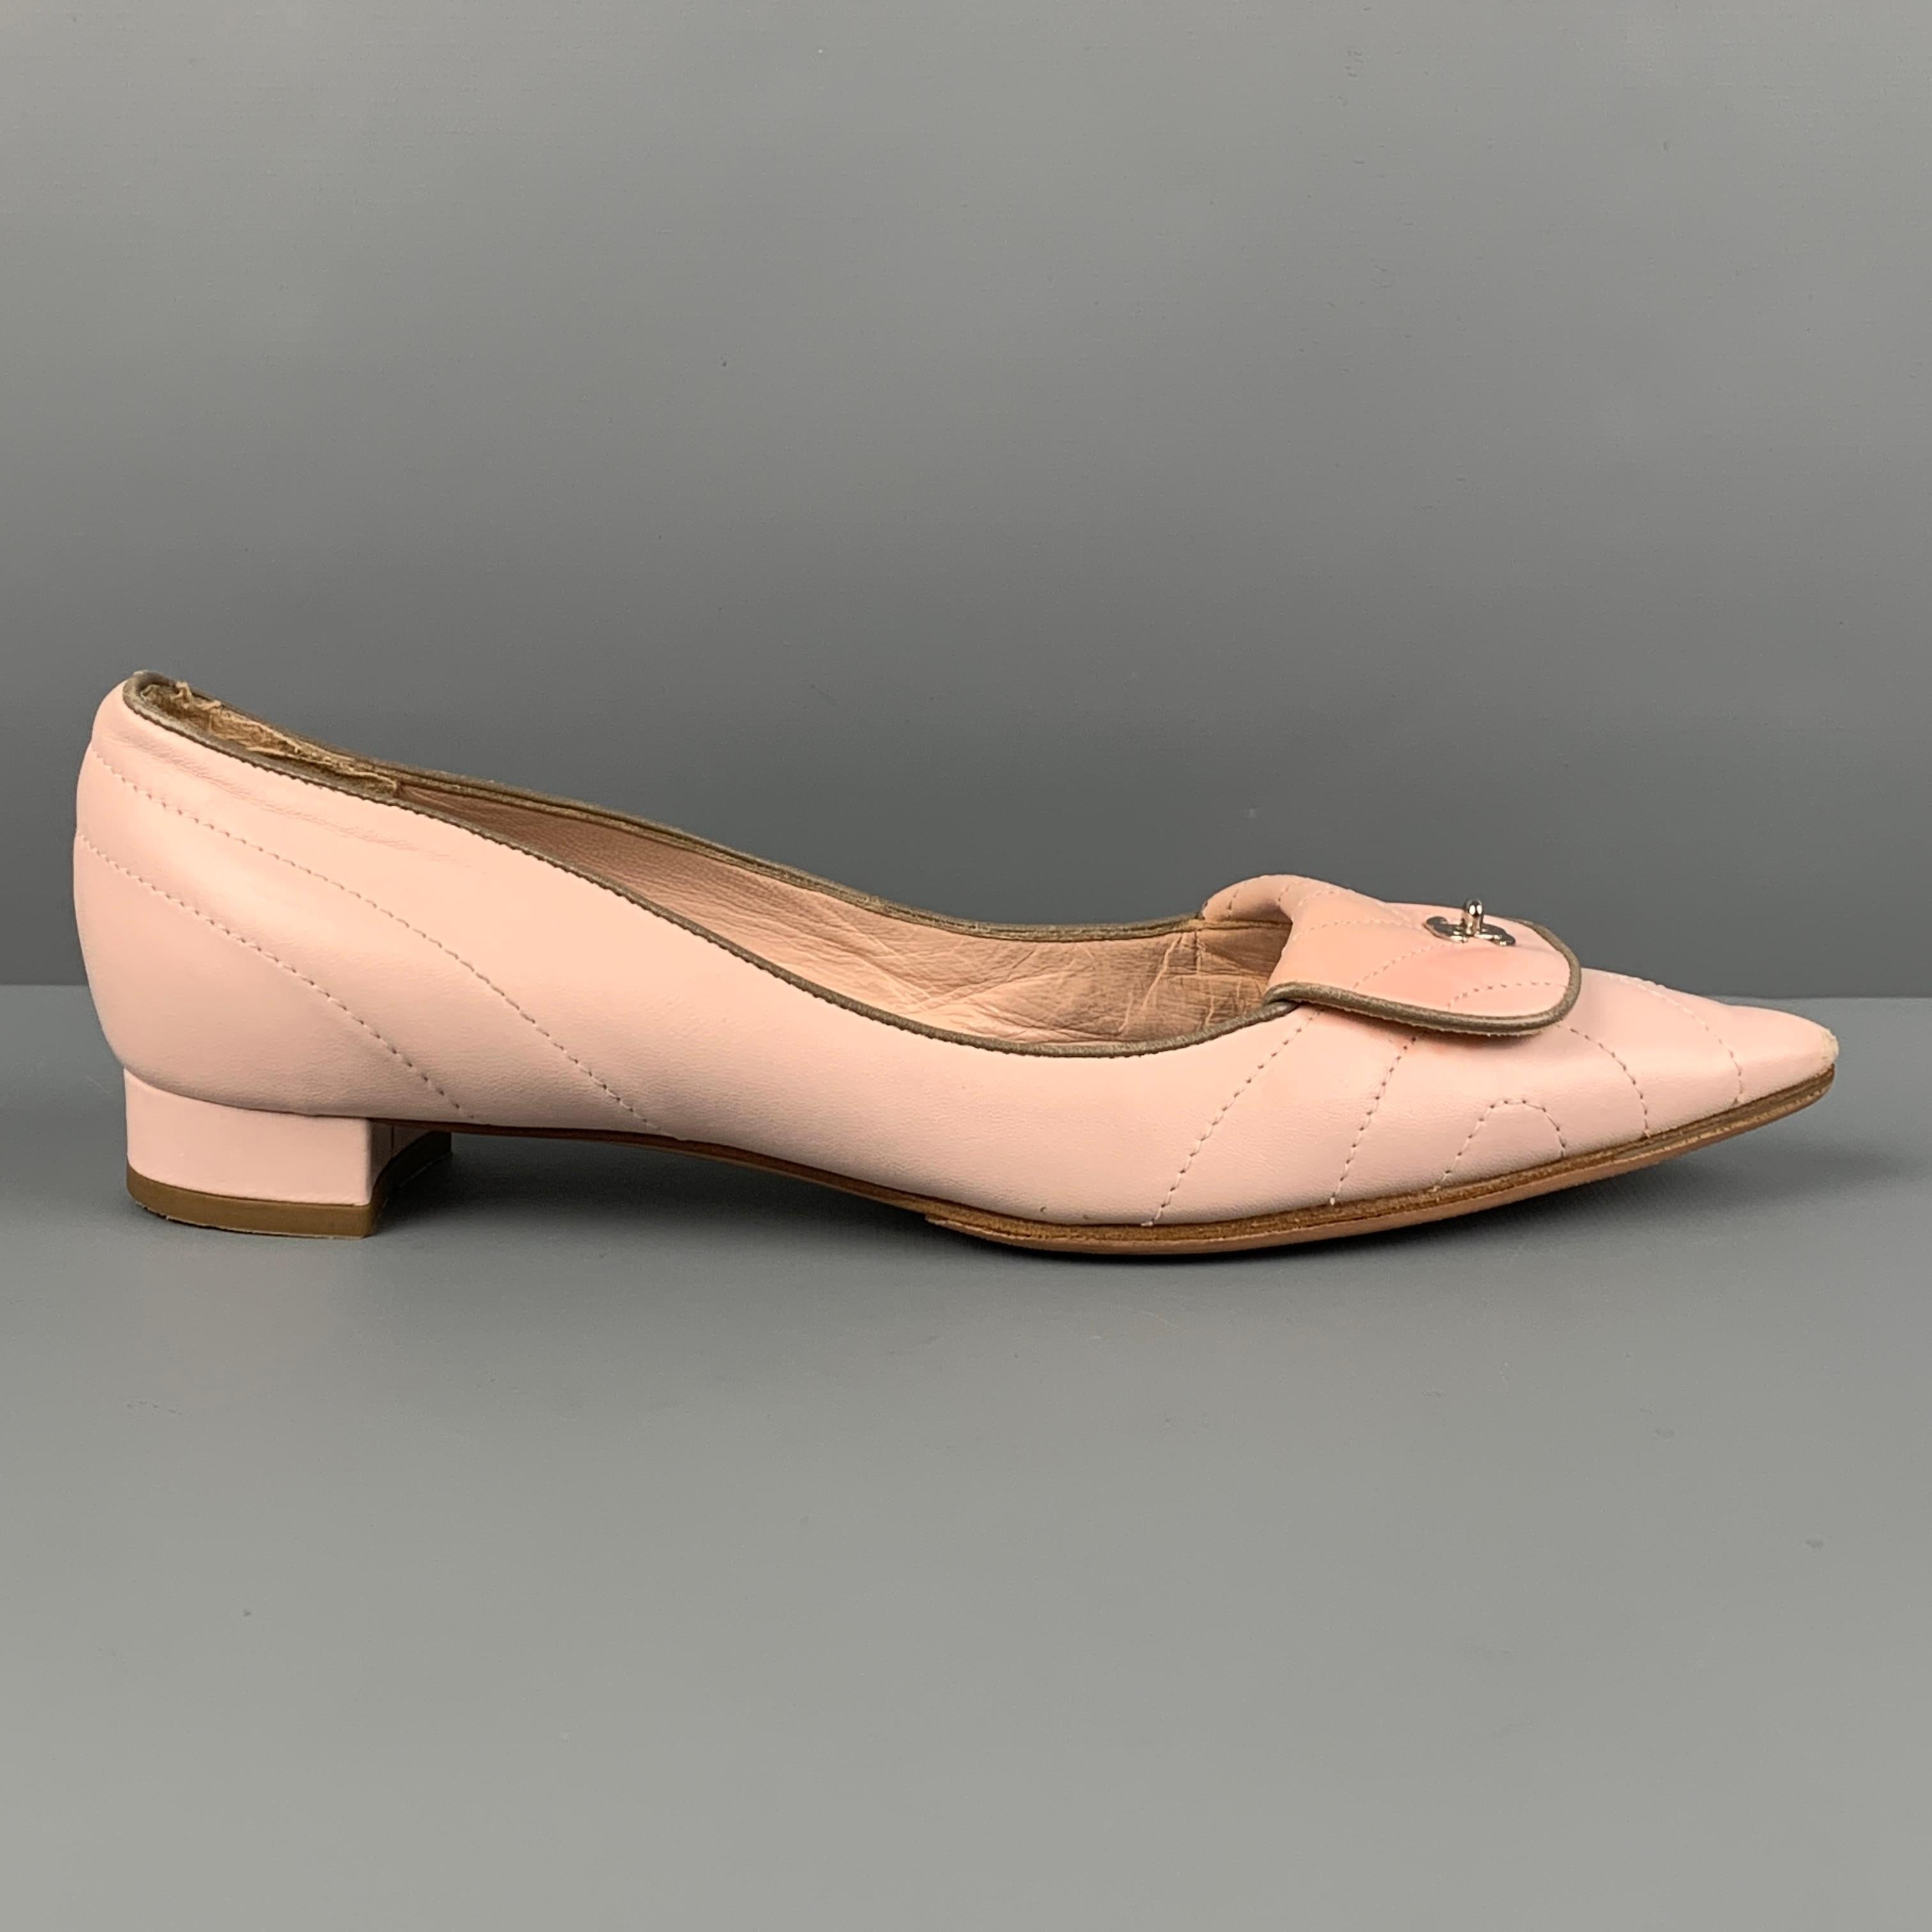 CHANEL flats comes in a pink leather featuring top stitching, pointed toe, CC flap design, and a chunky heel. Made in Italy. 

Good Pre-Owned Condition. Moderate discoloration at front. As-Is.
Marked: 37

Outsole: 10.25 in. x 3 in.